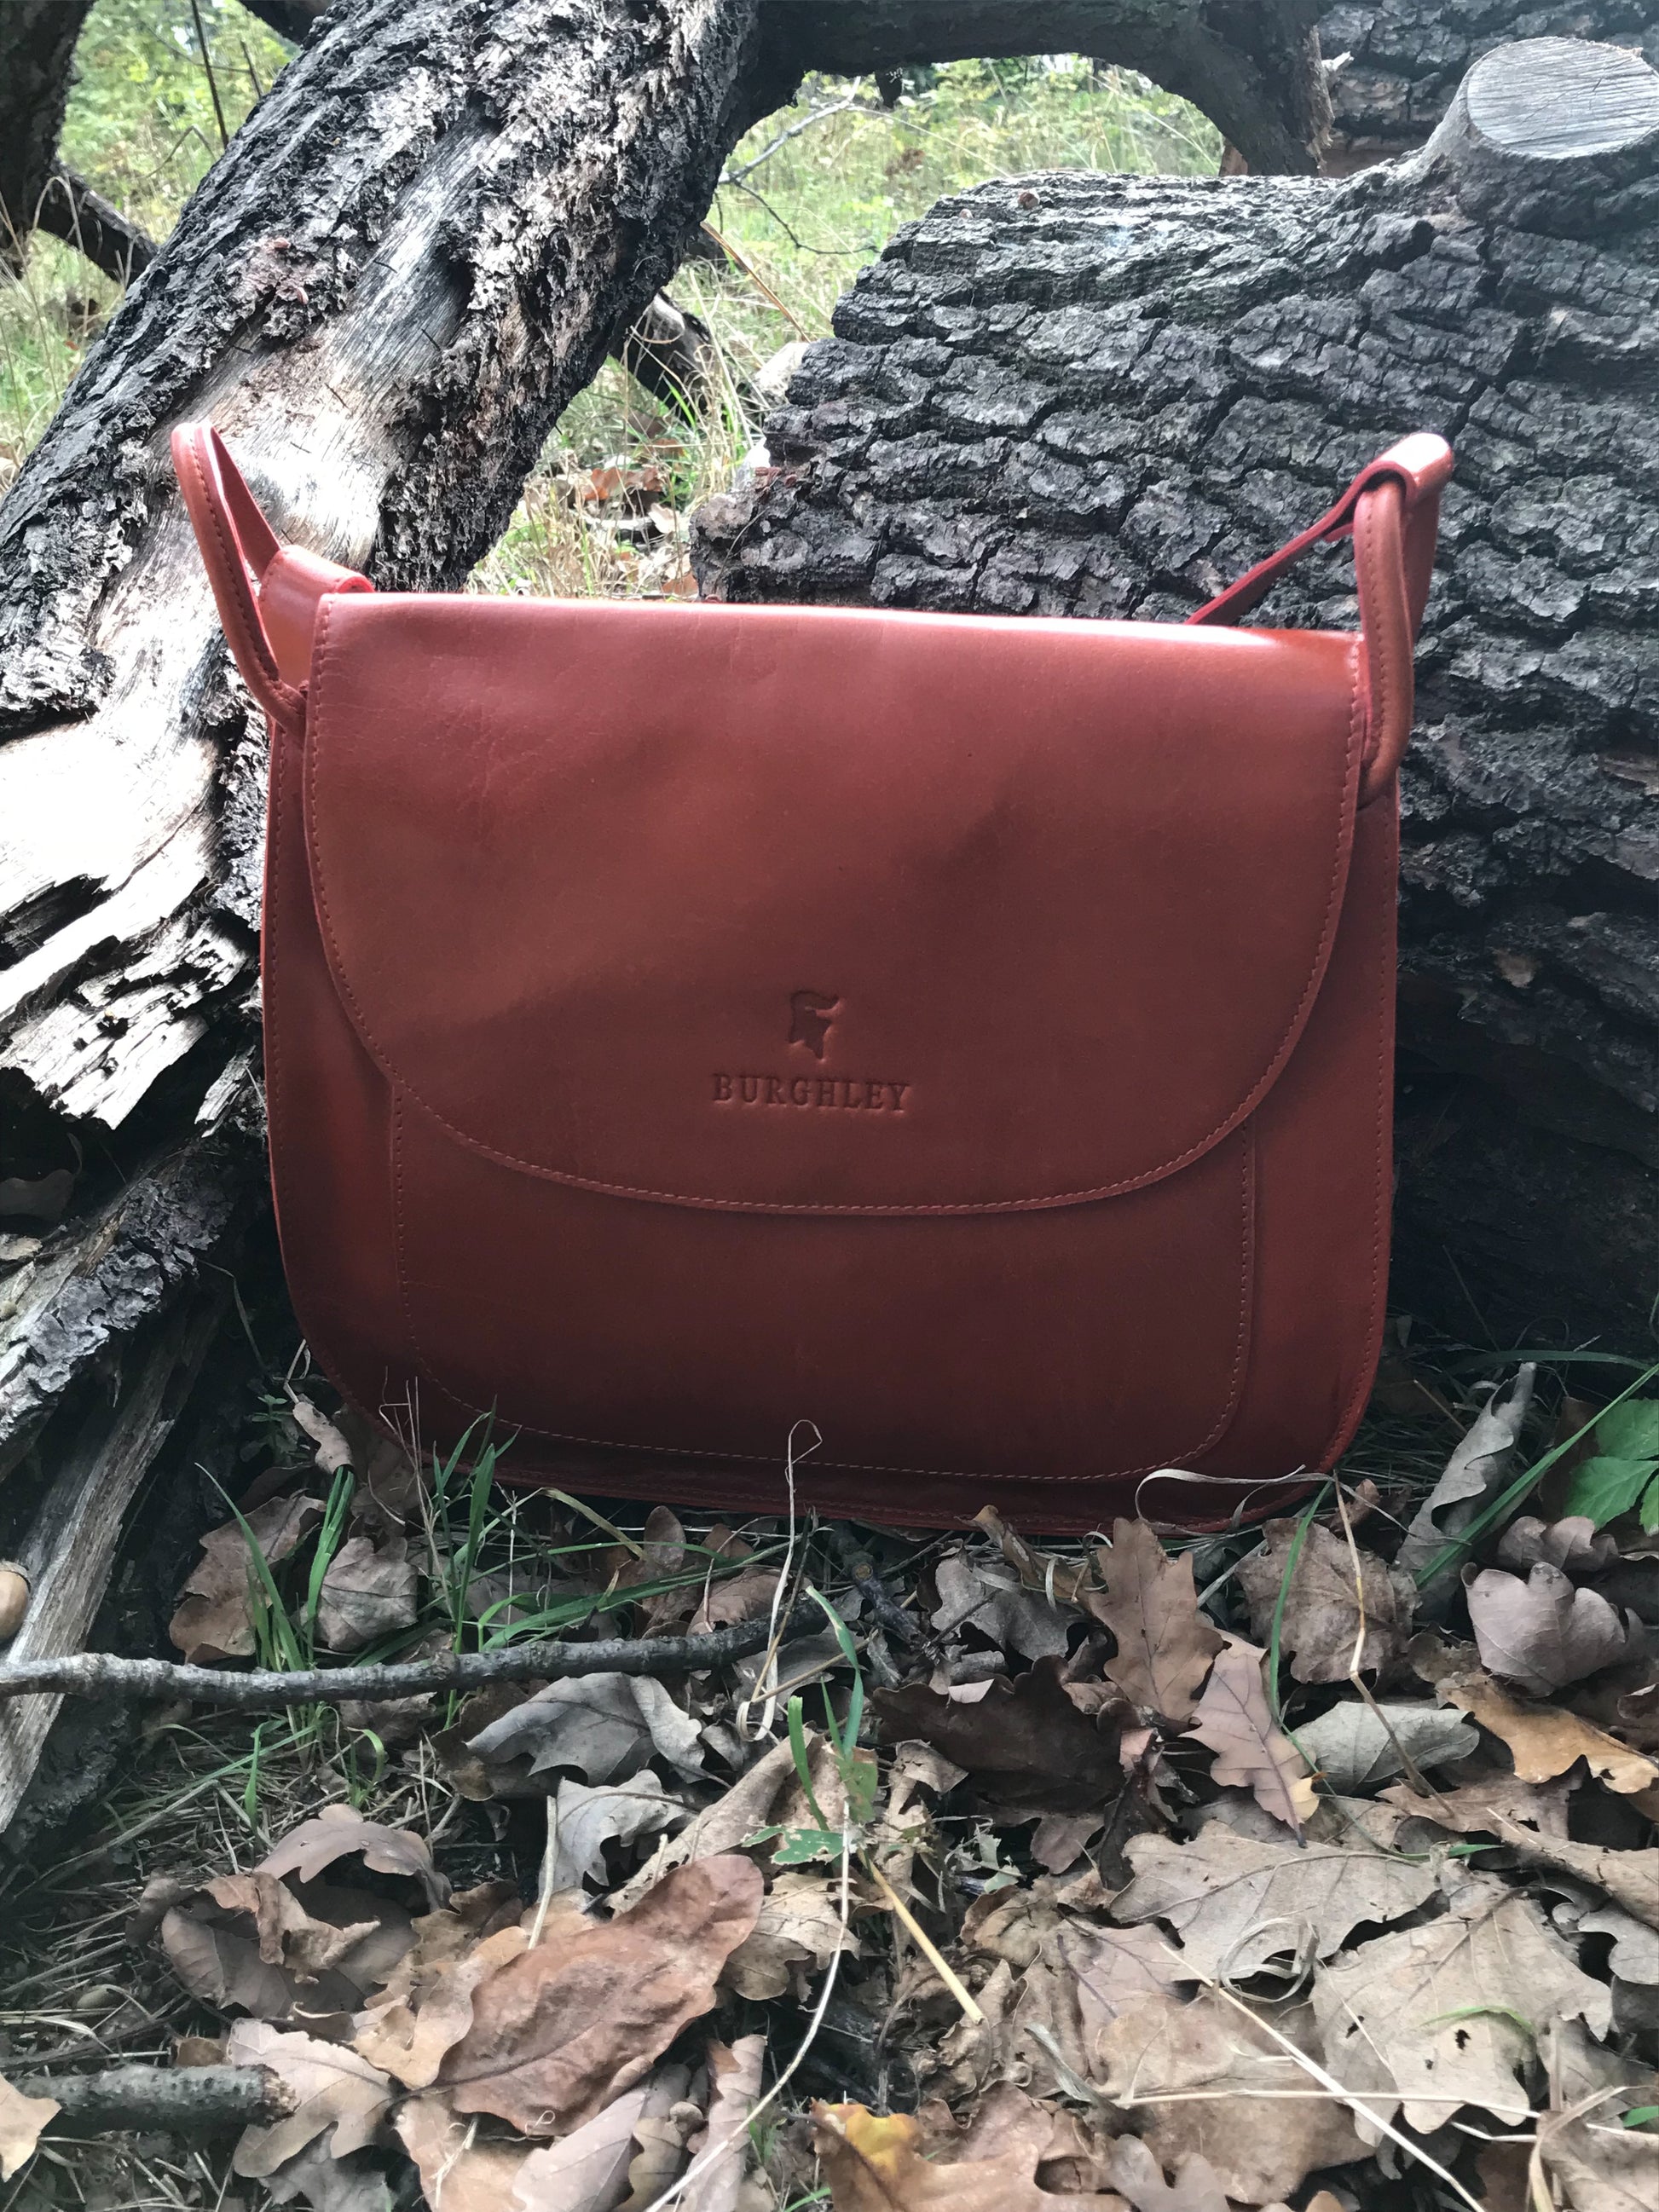 The Aunby Saddlebag.  A handmade leather bag by Burghley Bags in a classic chocolate brown colour.